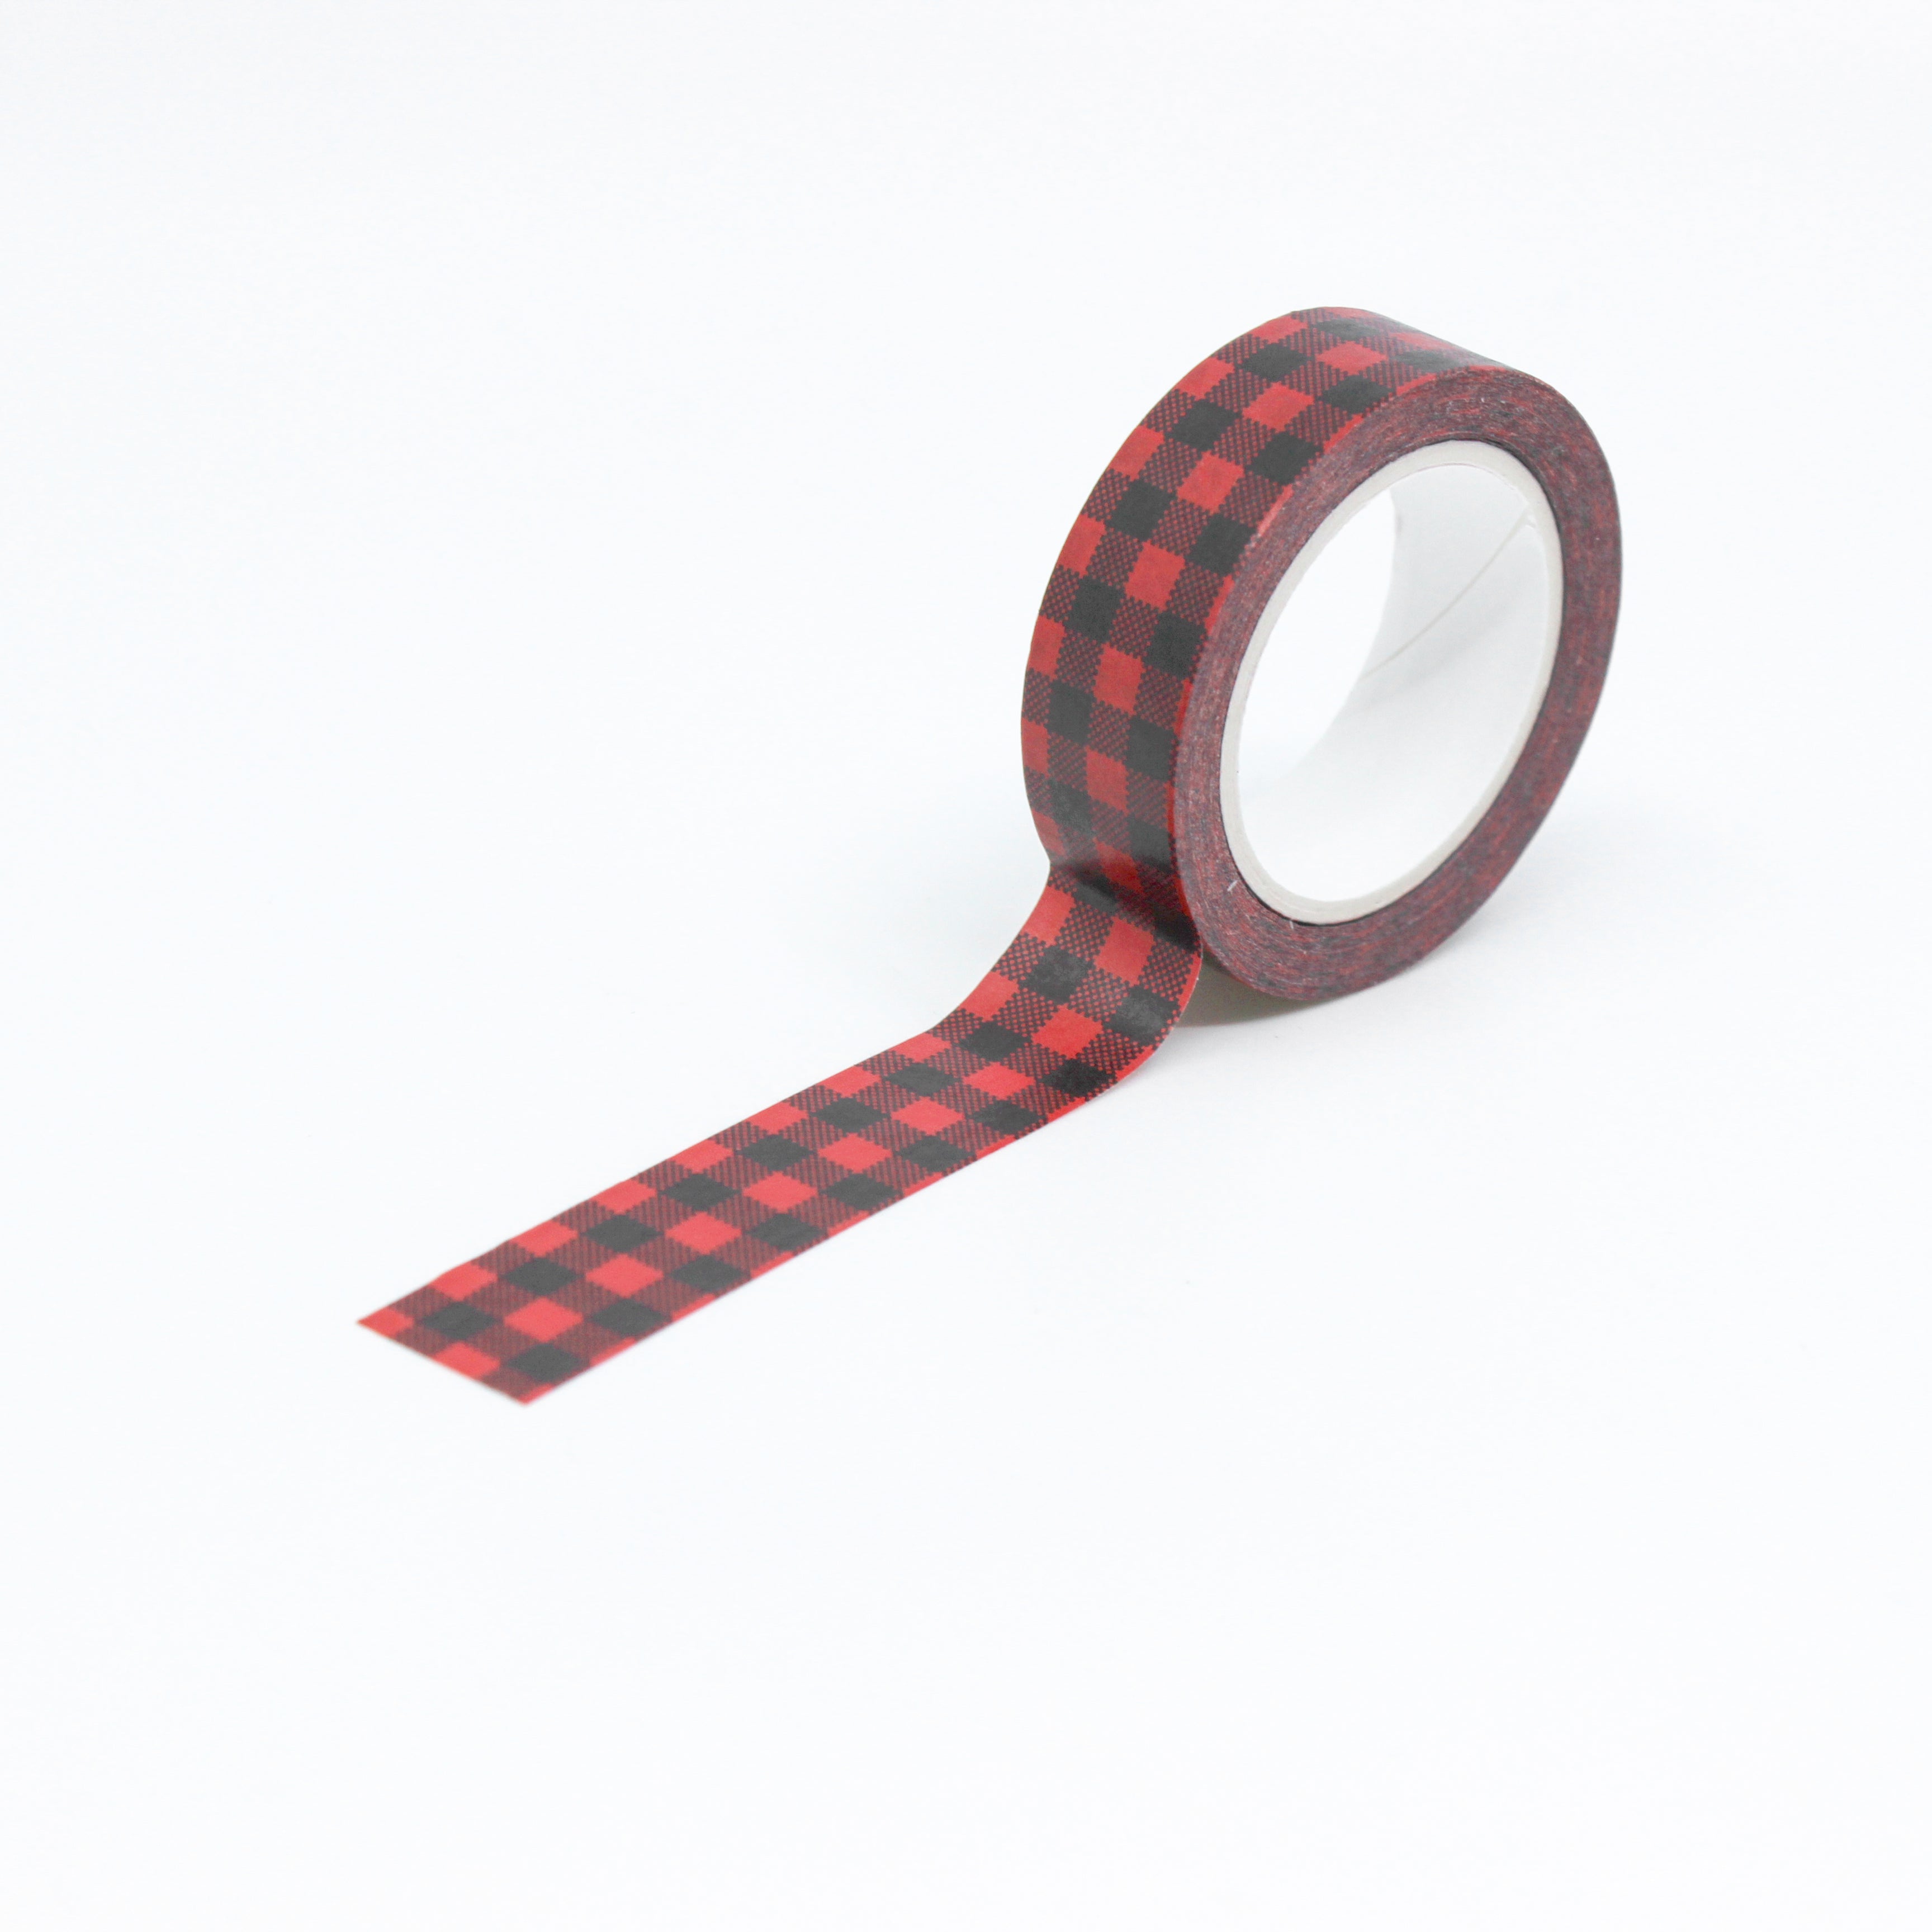 This is a repeat full pattern view winter black and red buffalo checkered plaid pattern washi tape from BBB Supplies Craft Shop